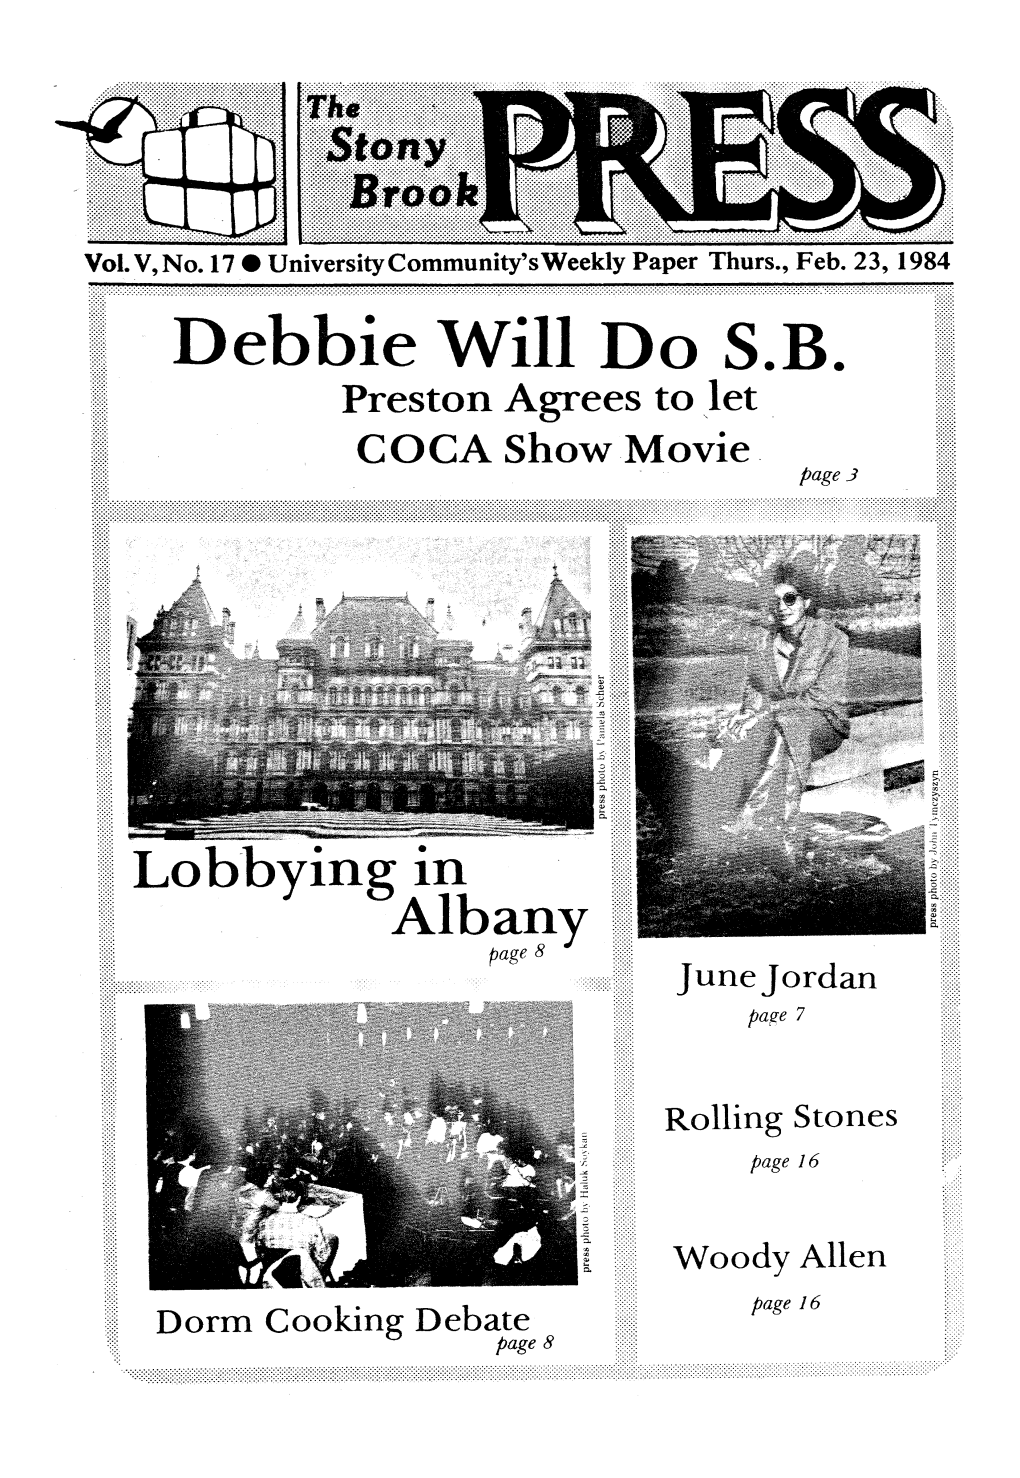 Debbie Does Dallas" Unless Ture Hall 100 This Friday and It Conforms to University Policy